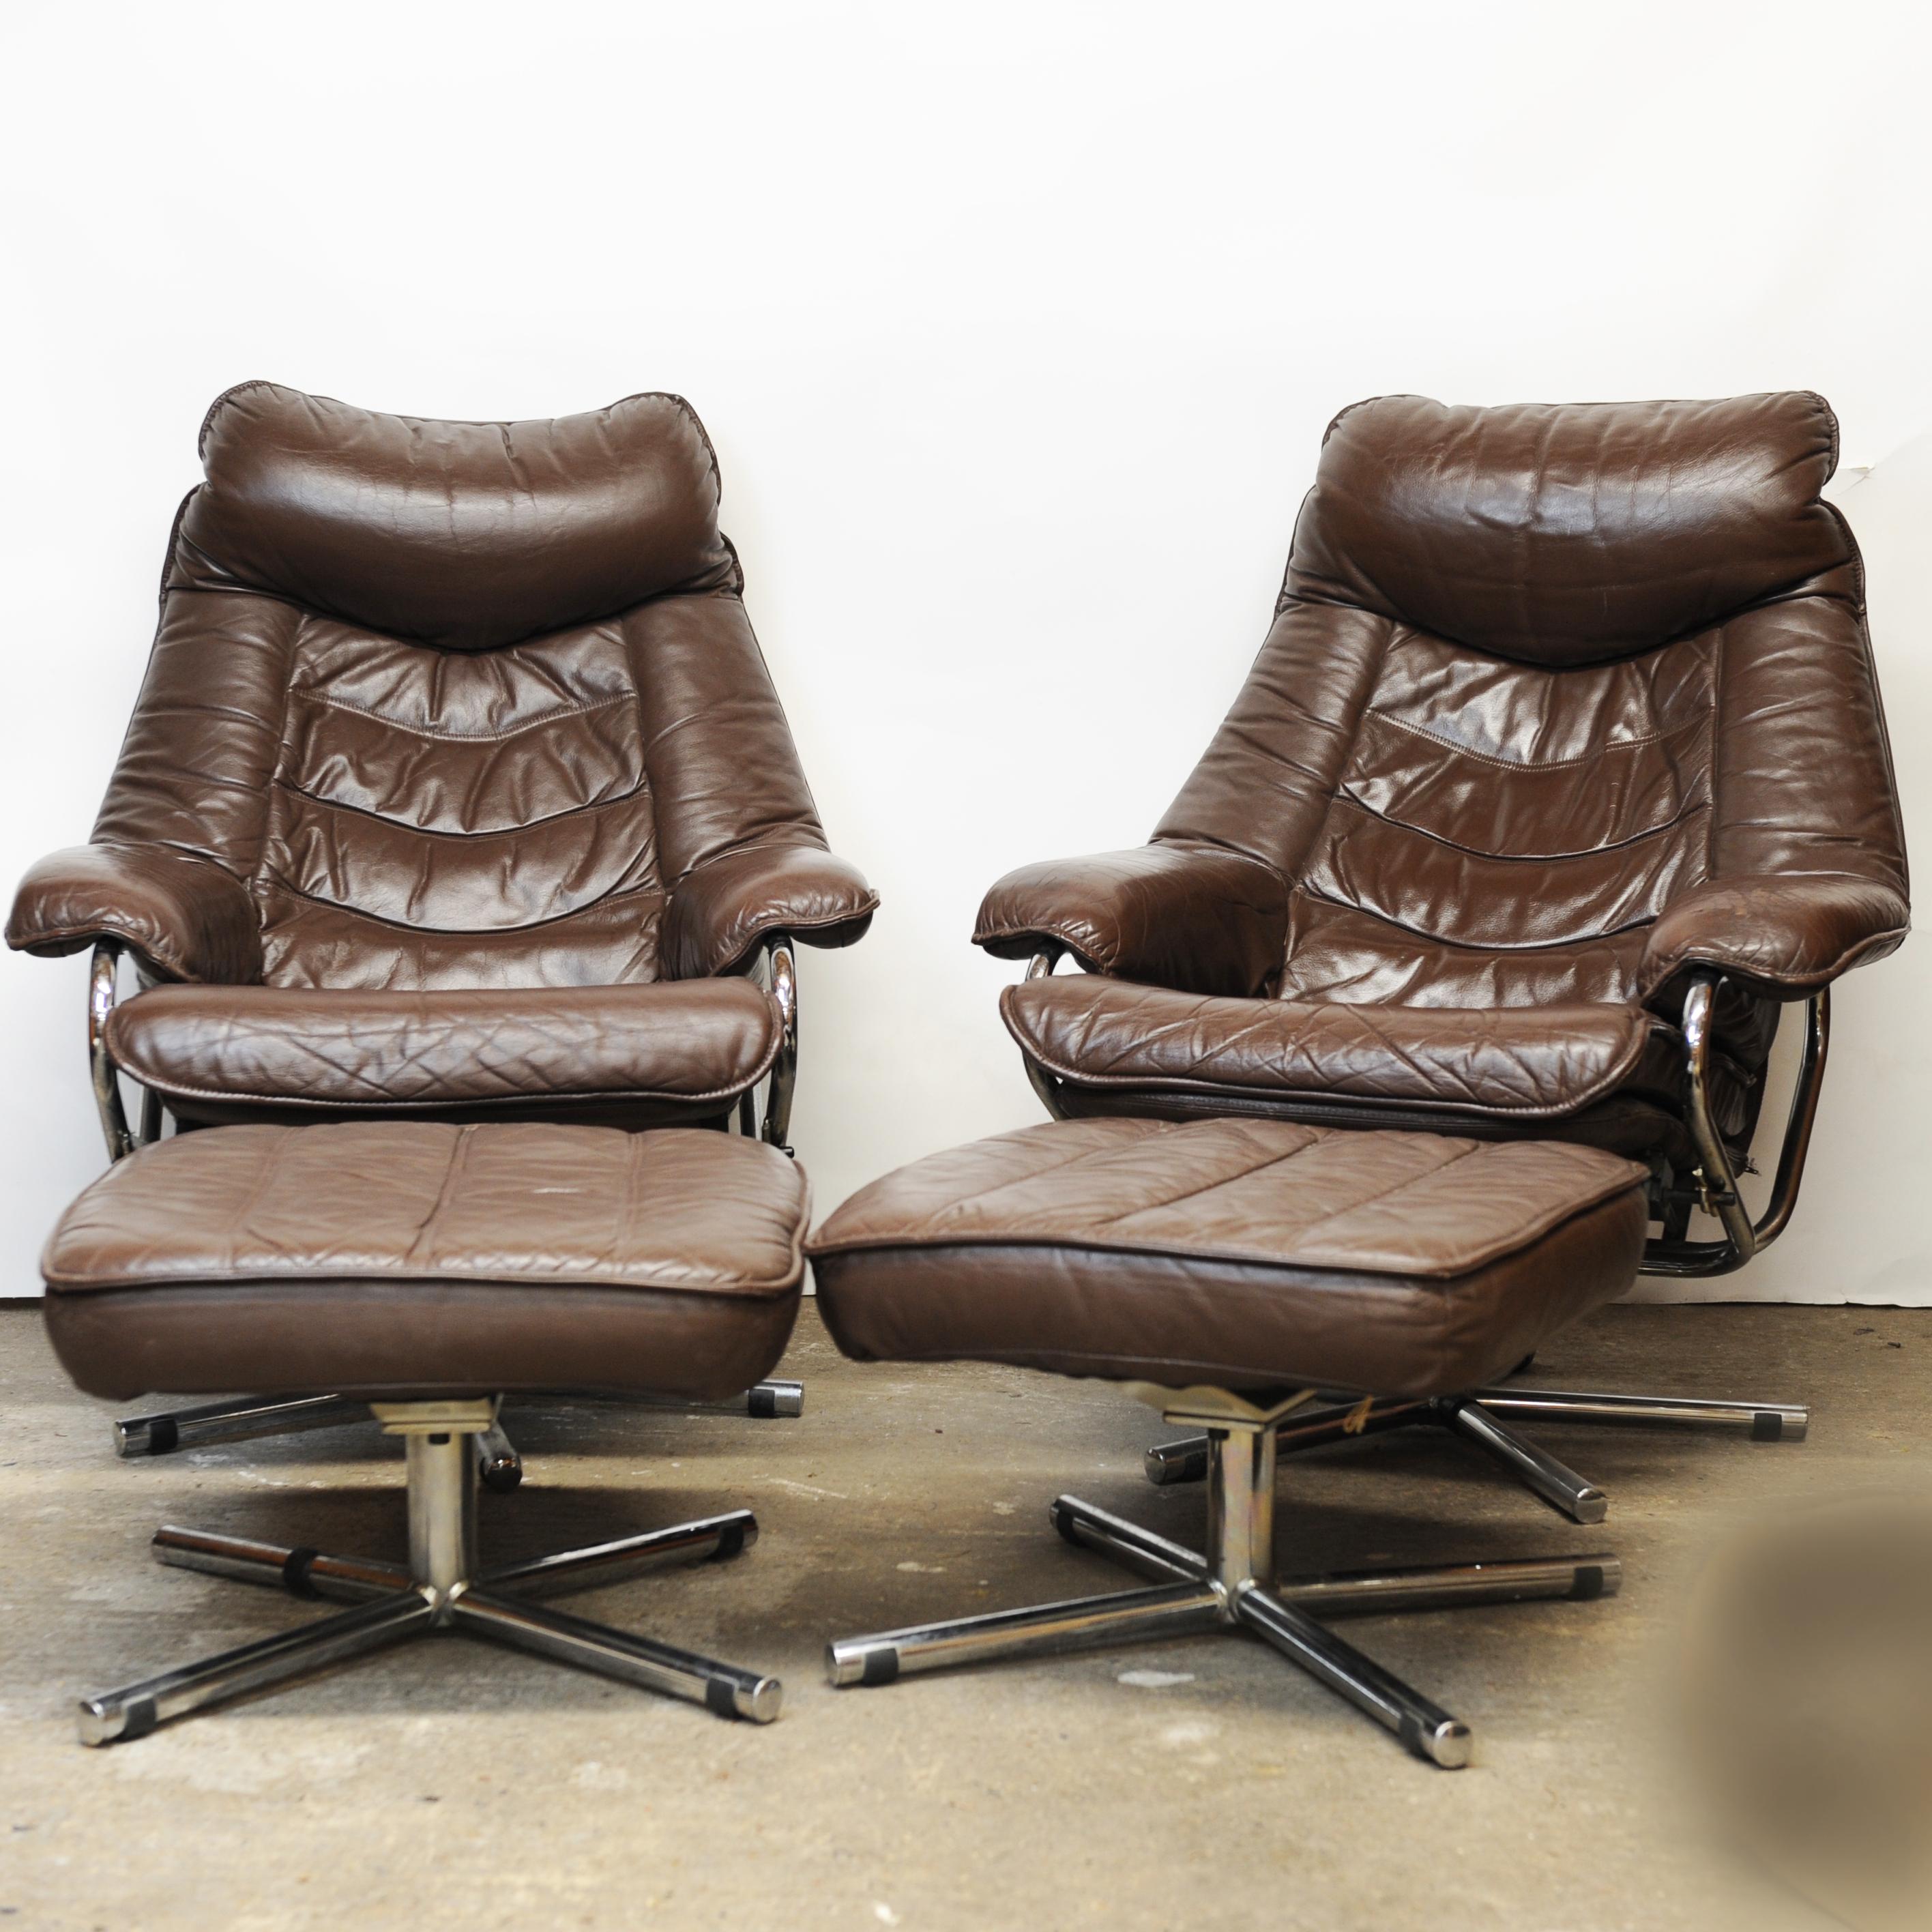 Pair of Norwegian Lounge Chairs with Footstools in Brown Leather by Skoghaus  In Good Condition For Sale In Chesham, GB